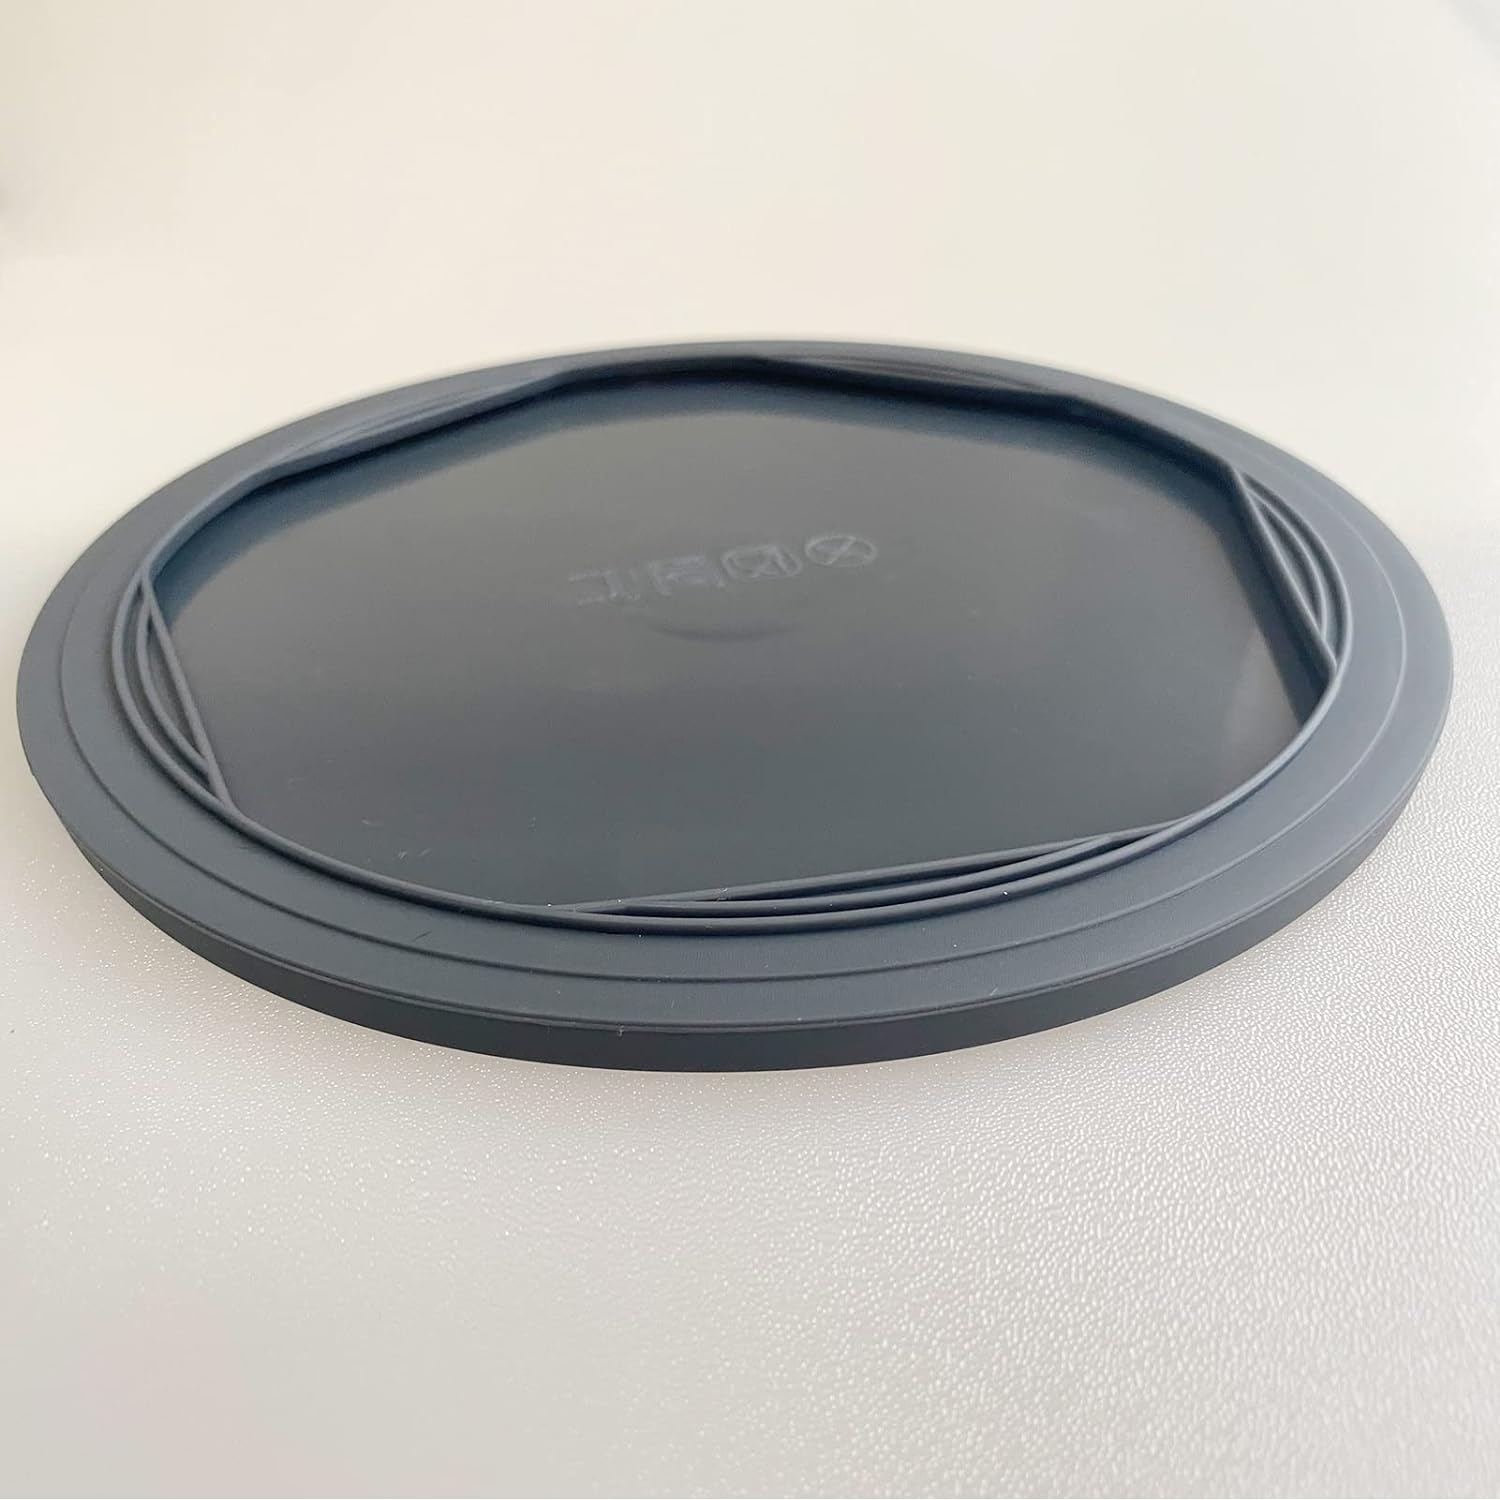 Food Grade Silicone Lid Sealing Fermentation Cover for Vitamix Thermomix TM31/TM5/TM6,Kitchen Accessory, Easy to Clean, Simple Installation